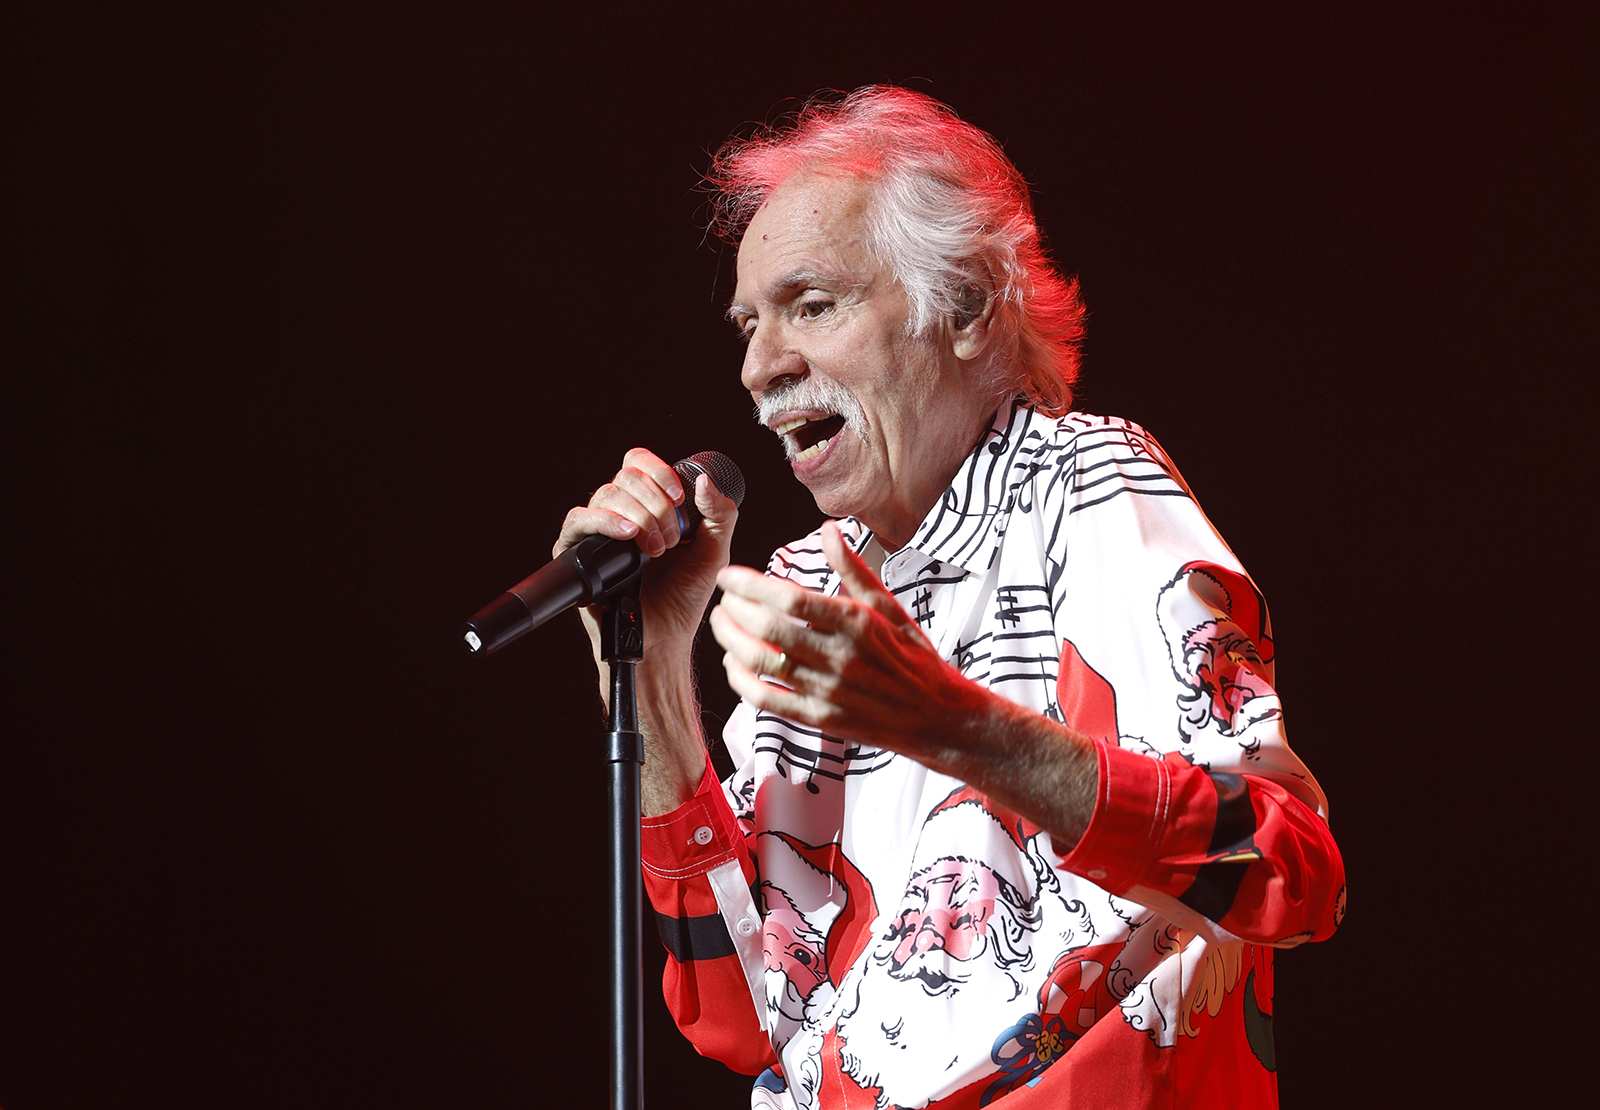 Oak Ridge Boys singer retires from the road after 50 years due to neuromuscular disorder